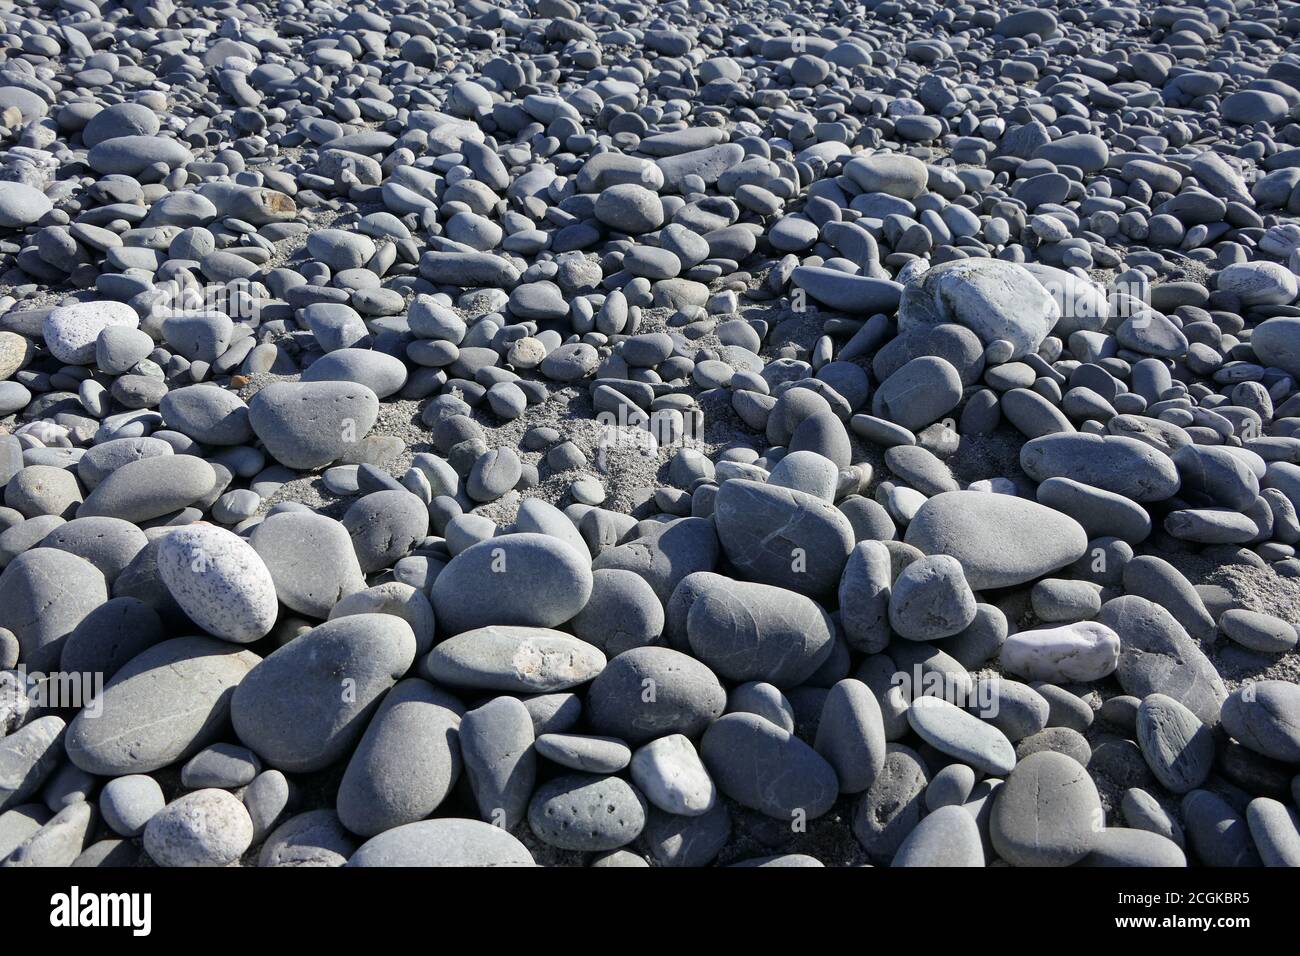 Rocky, stony nature and texture of a beach on the North Island of New Zealand Stock Photo